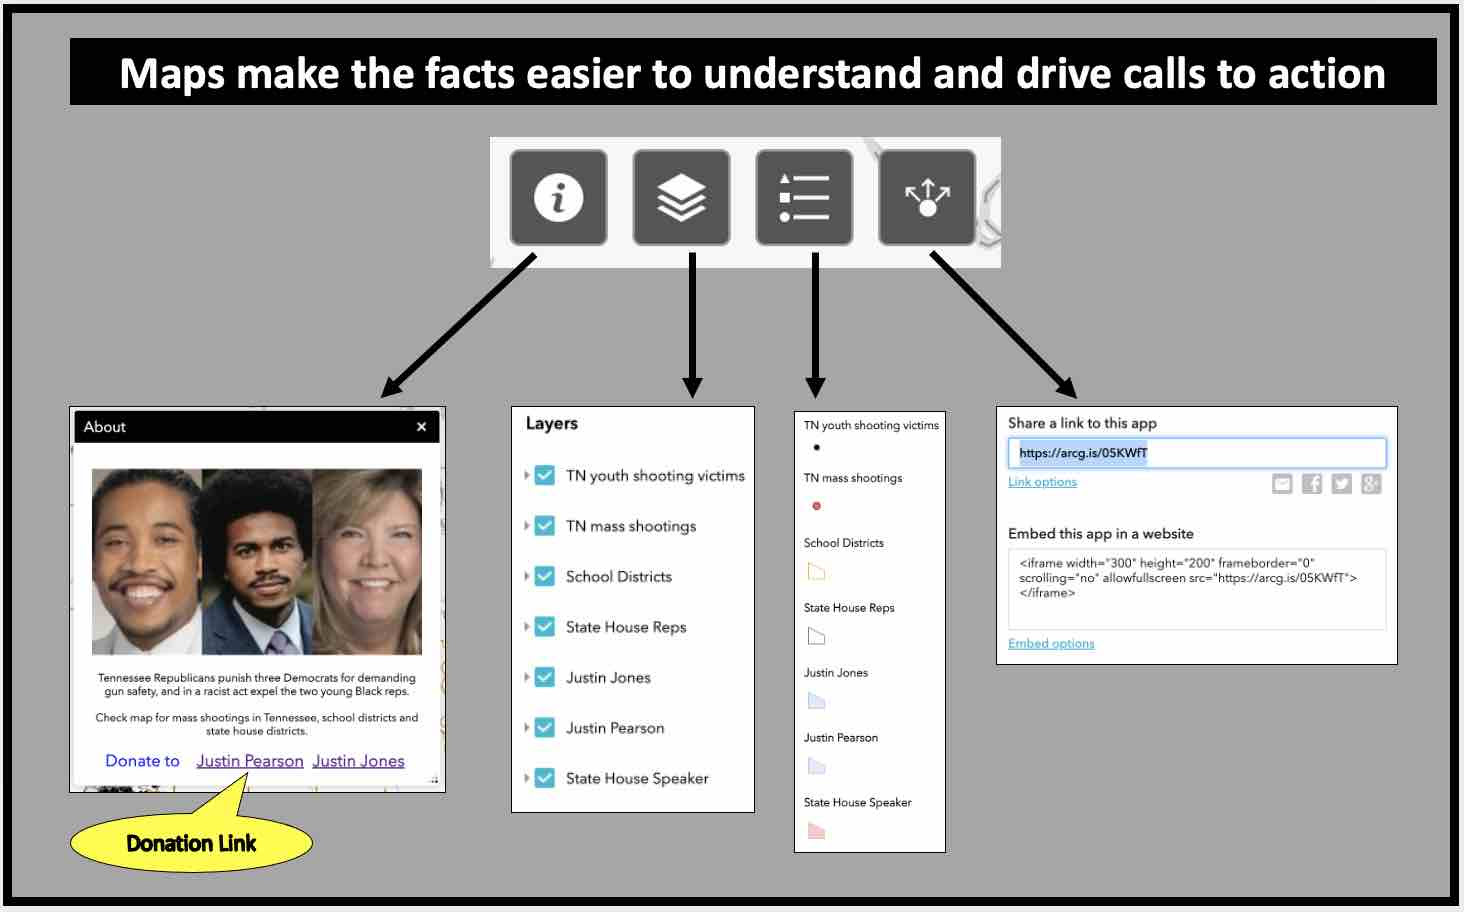 Maps make the facts easier to understand and drive calls to action